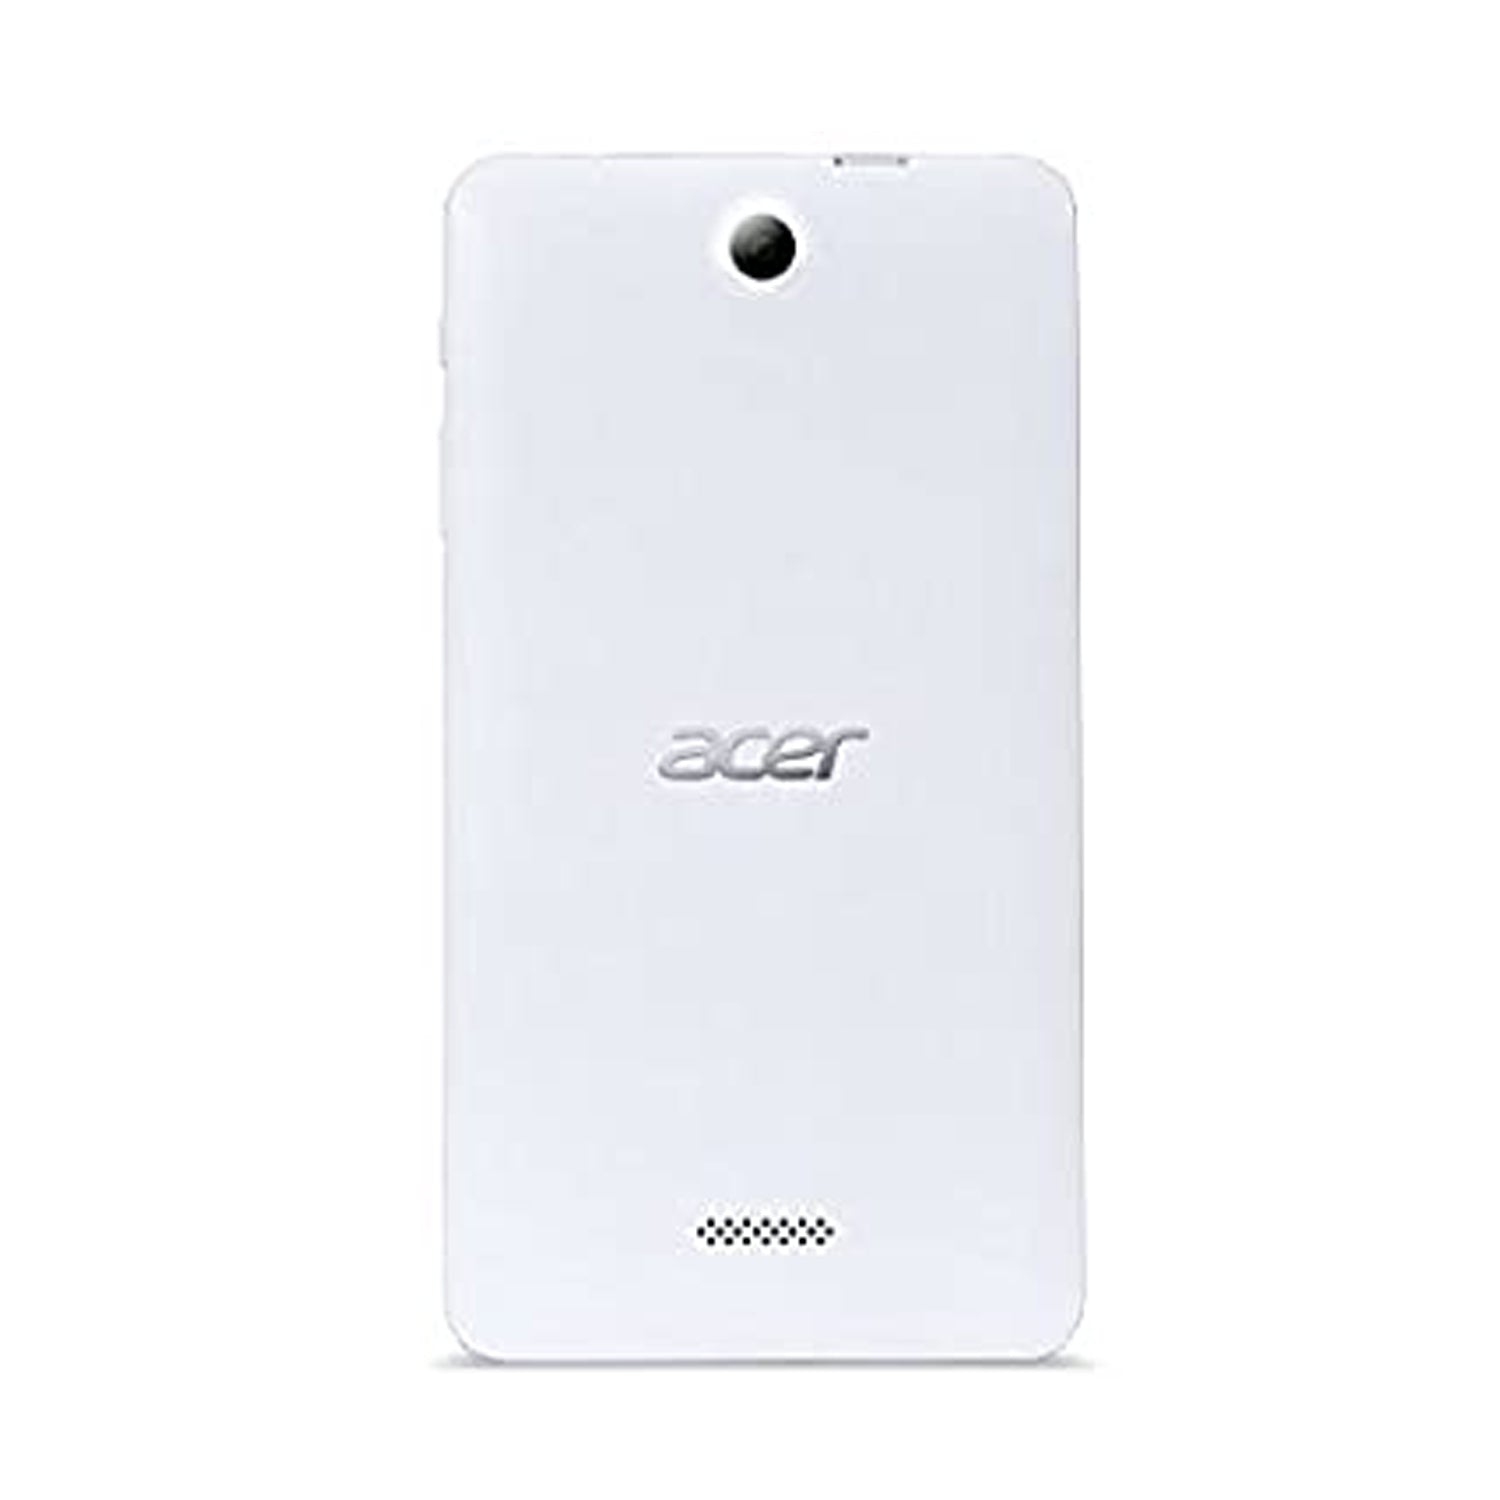 Back Cover For Acer Iconia B1-780 A6004 [Pro-Mobile]